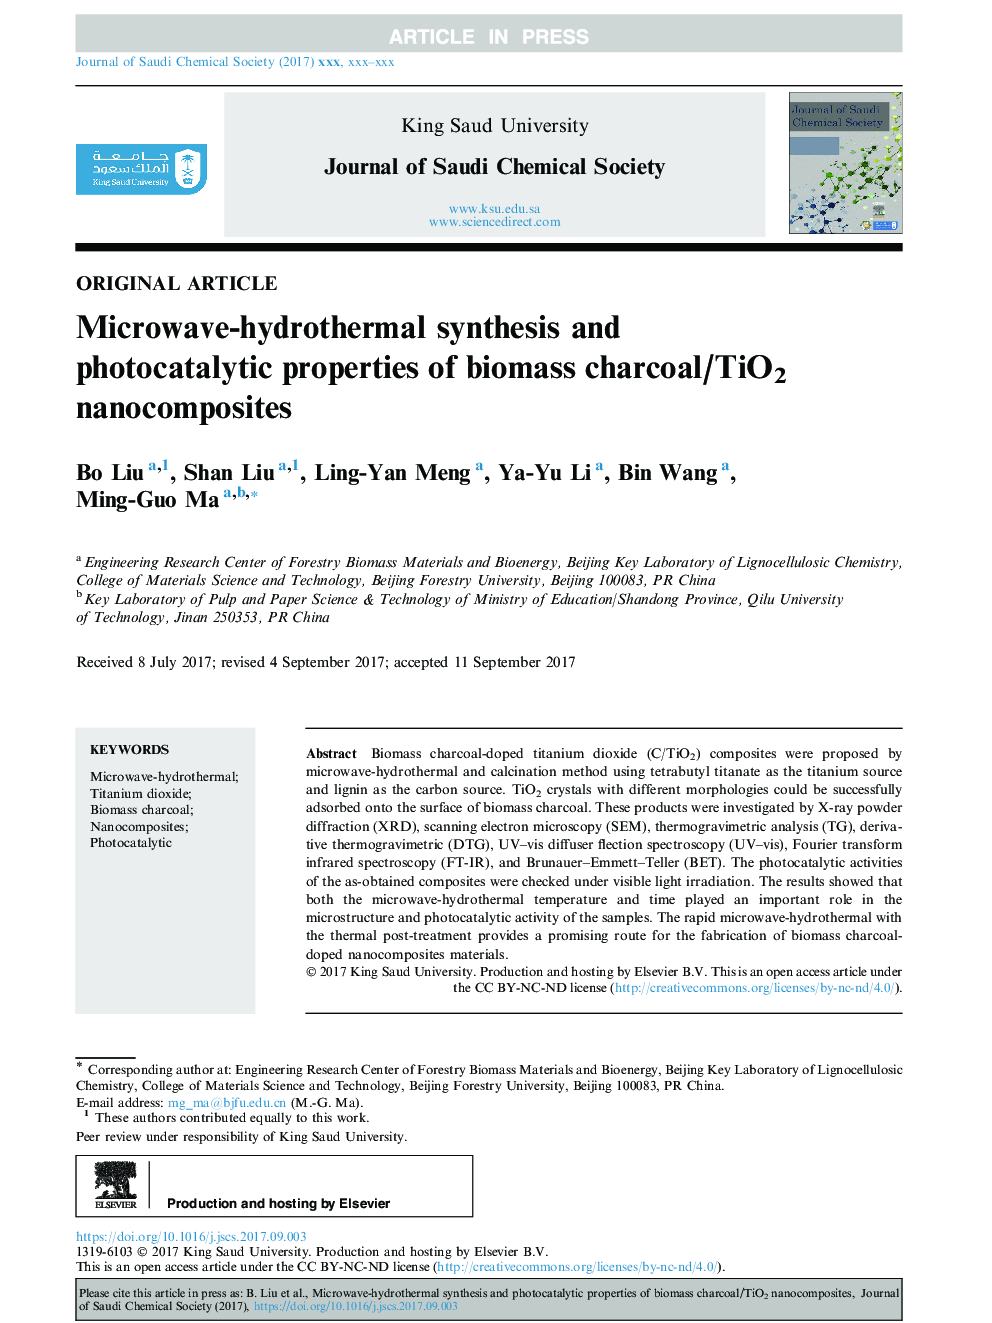 Microwave-hydrothermal synthesis and photocatalytic properties of biomass charcoal/TiO2 nanocomposites